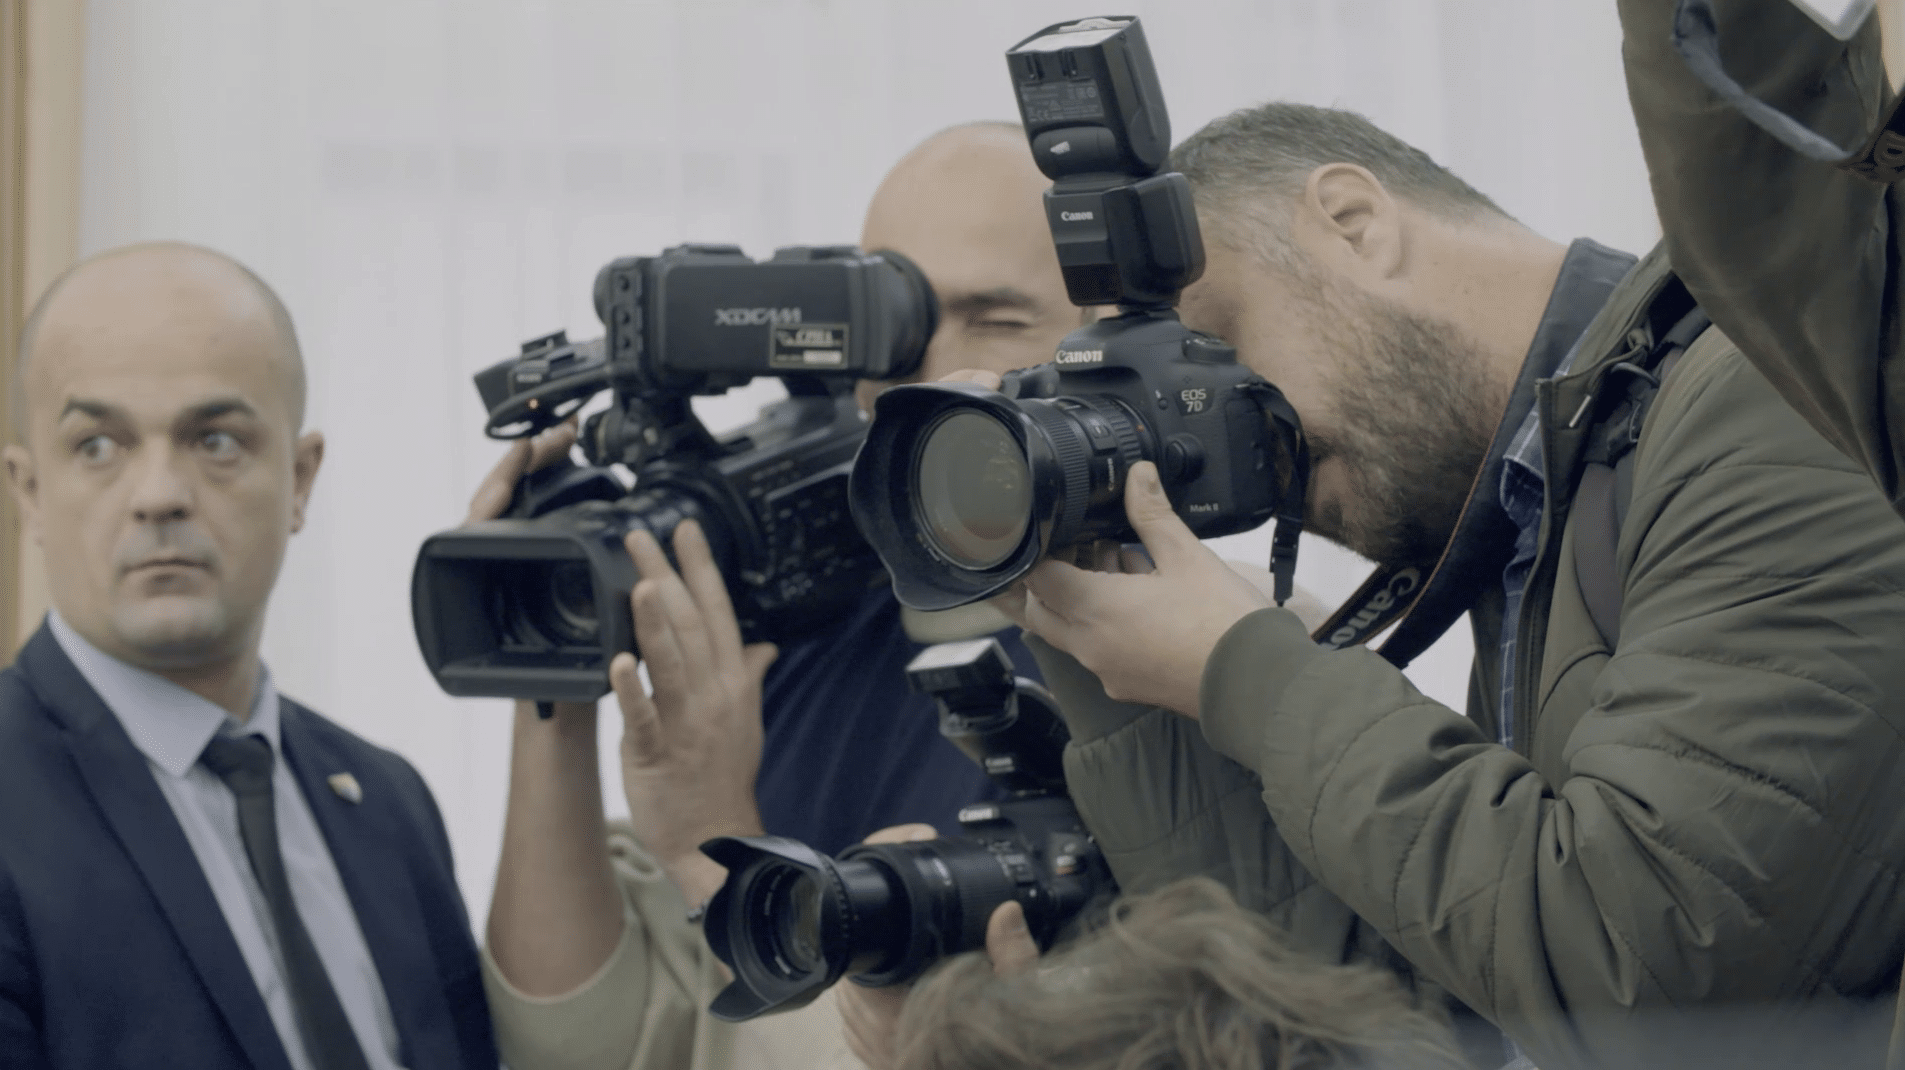 Suing to Silence: Lawsuits Used to Censor Bosnian Journalists